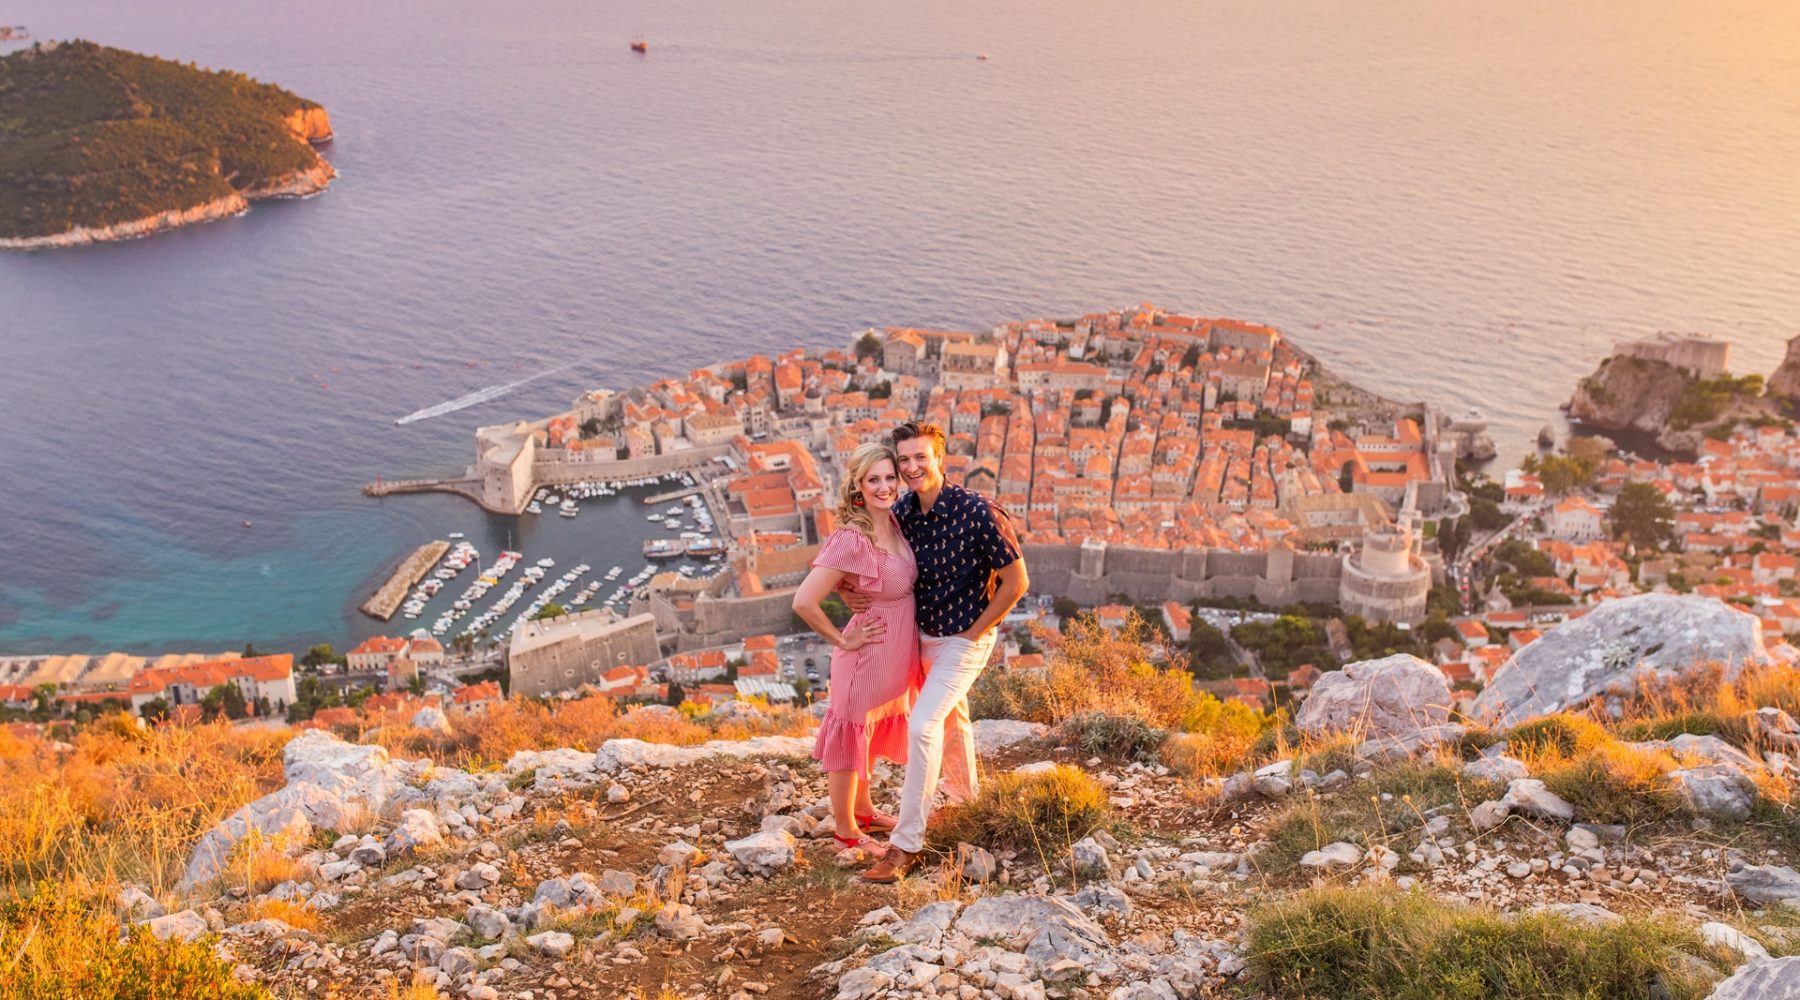 Couple photo session in Dubrovnik, Croatia by photographer Marie Calfopoulos